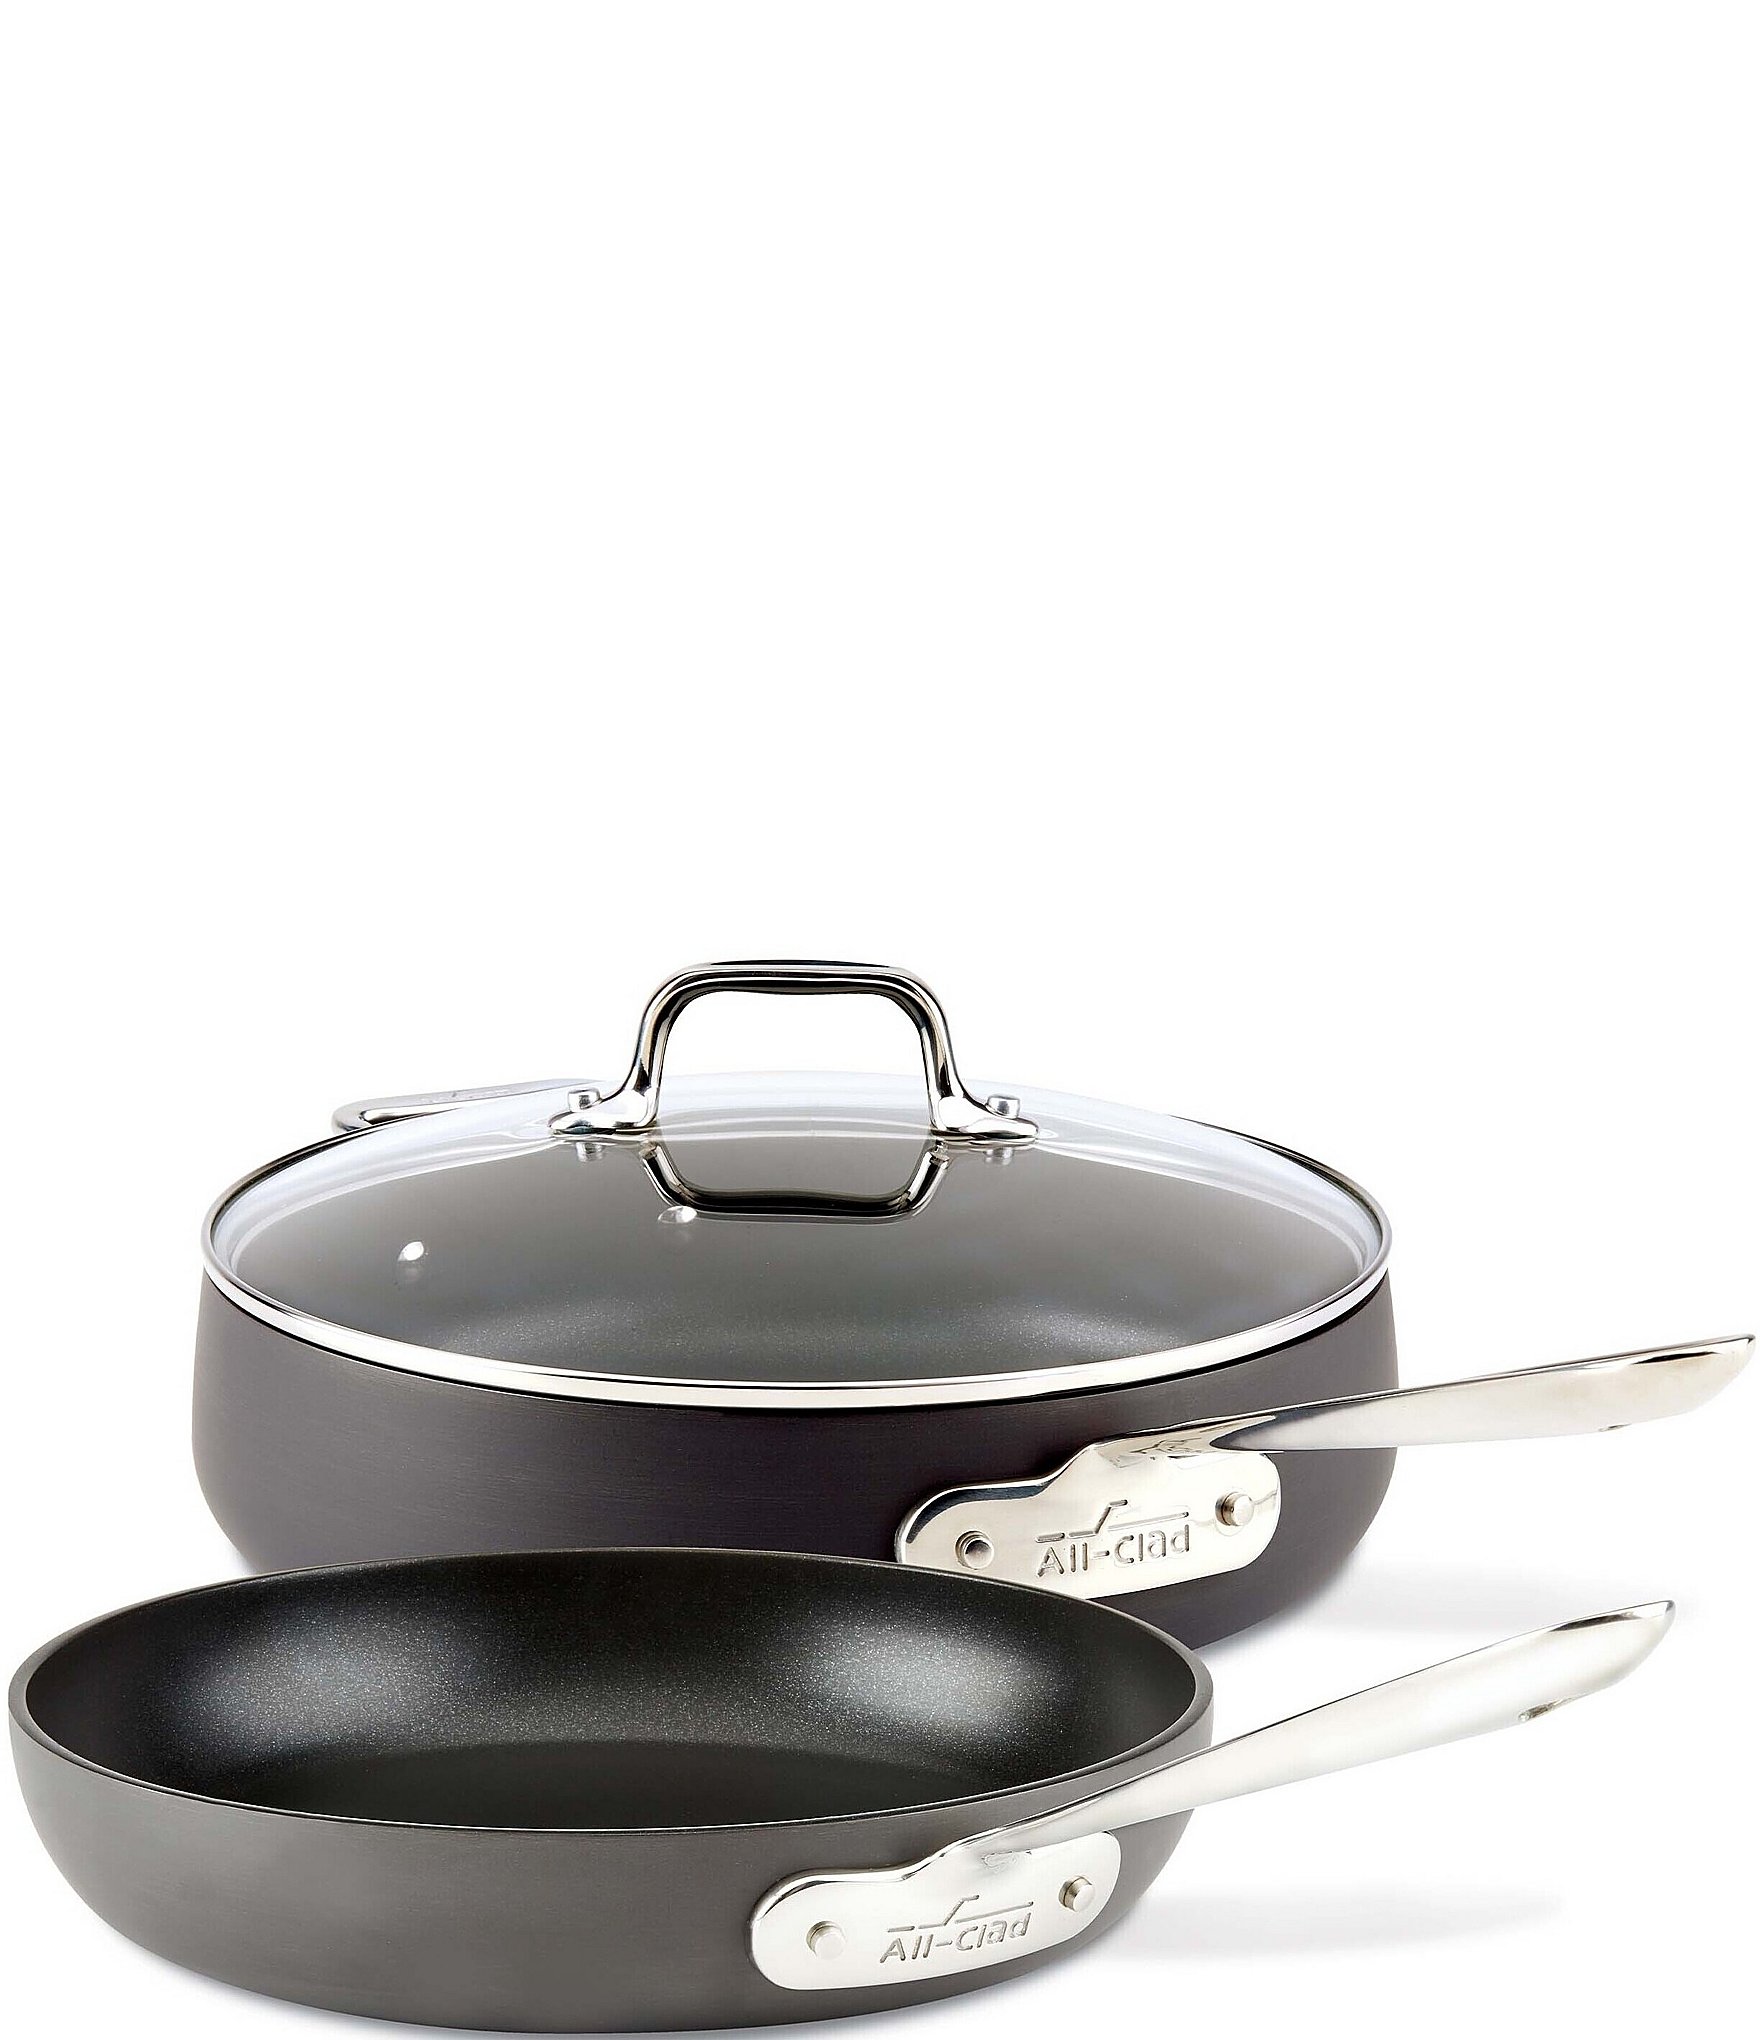  All-Clad HA1 Hard Anodized Nonstick Fry Pan Set 2